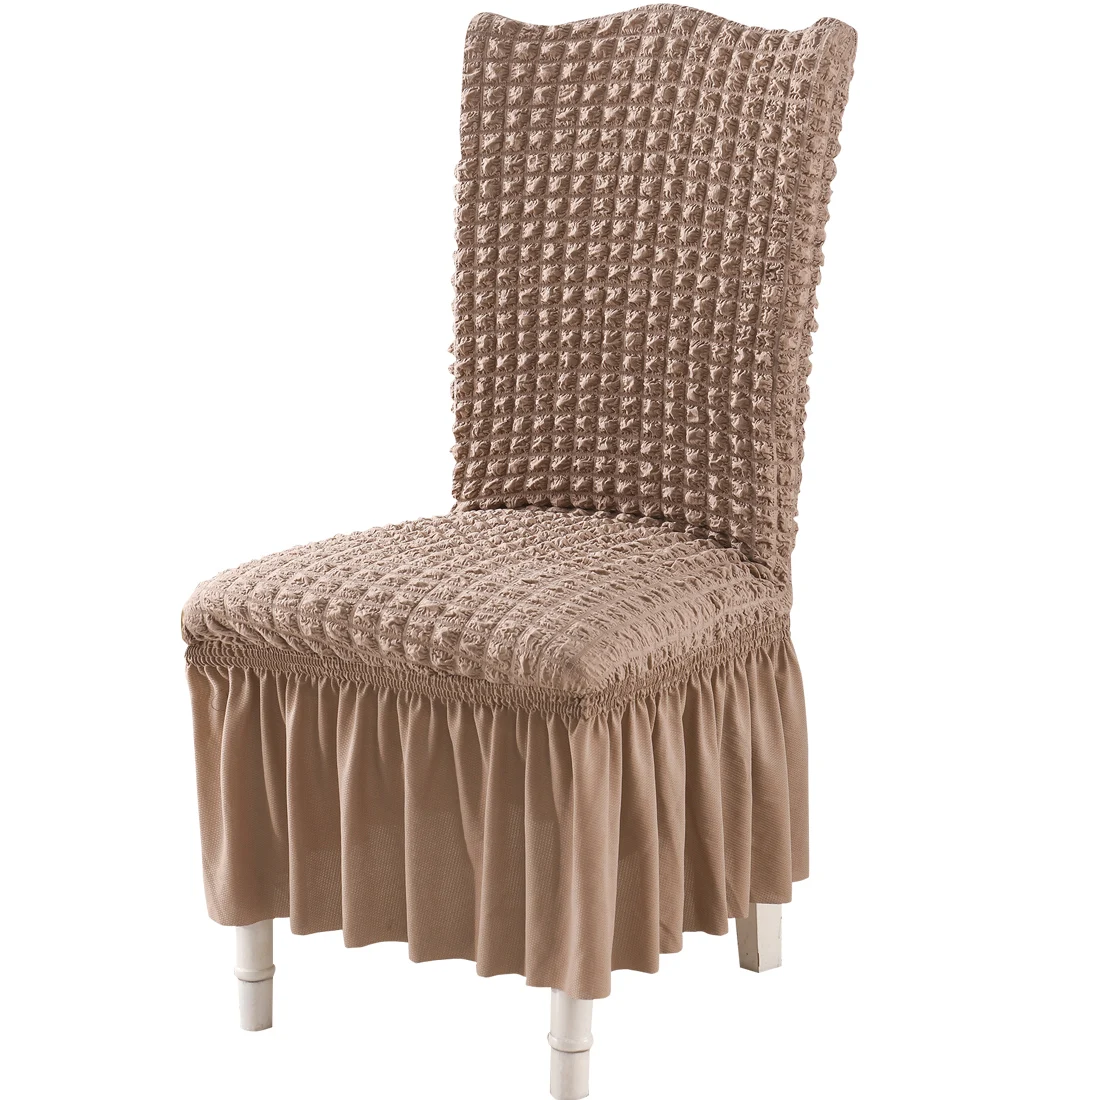 Jacquard Easy Fitted Chair Covers Turkey Stretch Universal Dining Chair  Cover With Skirt For Dining Room Hotel Ceremony Wedding - Buy Chair Cover  Universal,Easy Fitted Chair Covers,Chair Cover Brown Product on Alibaba.com